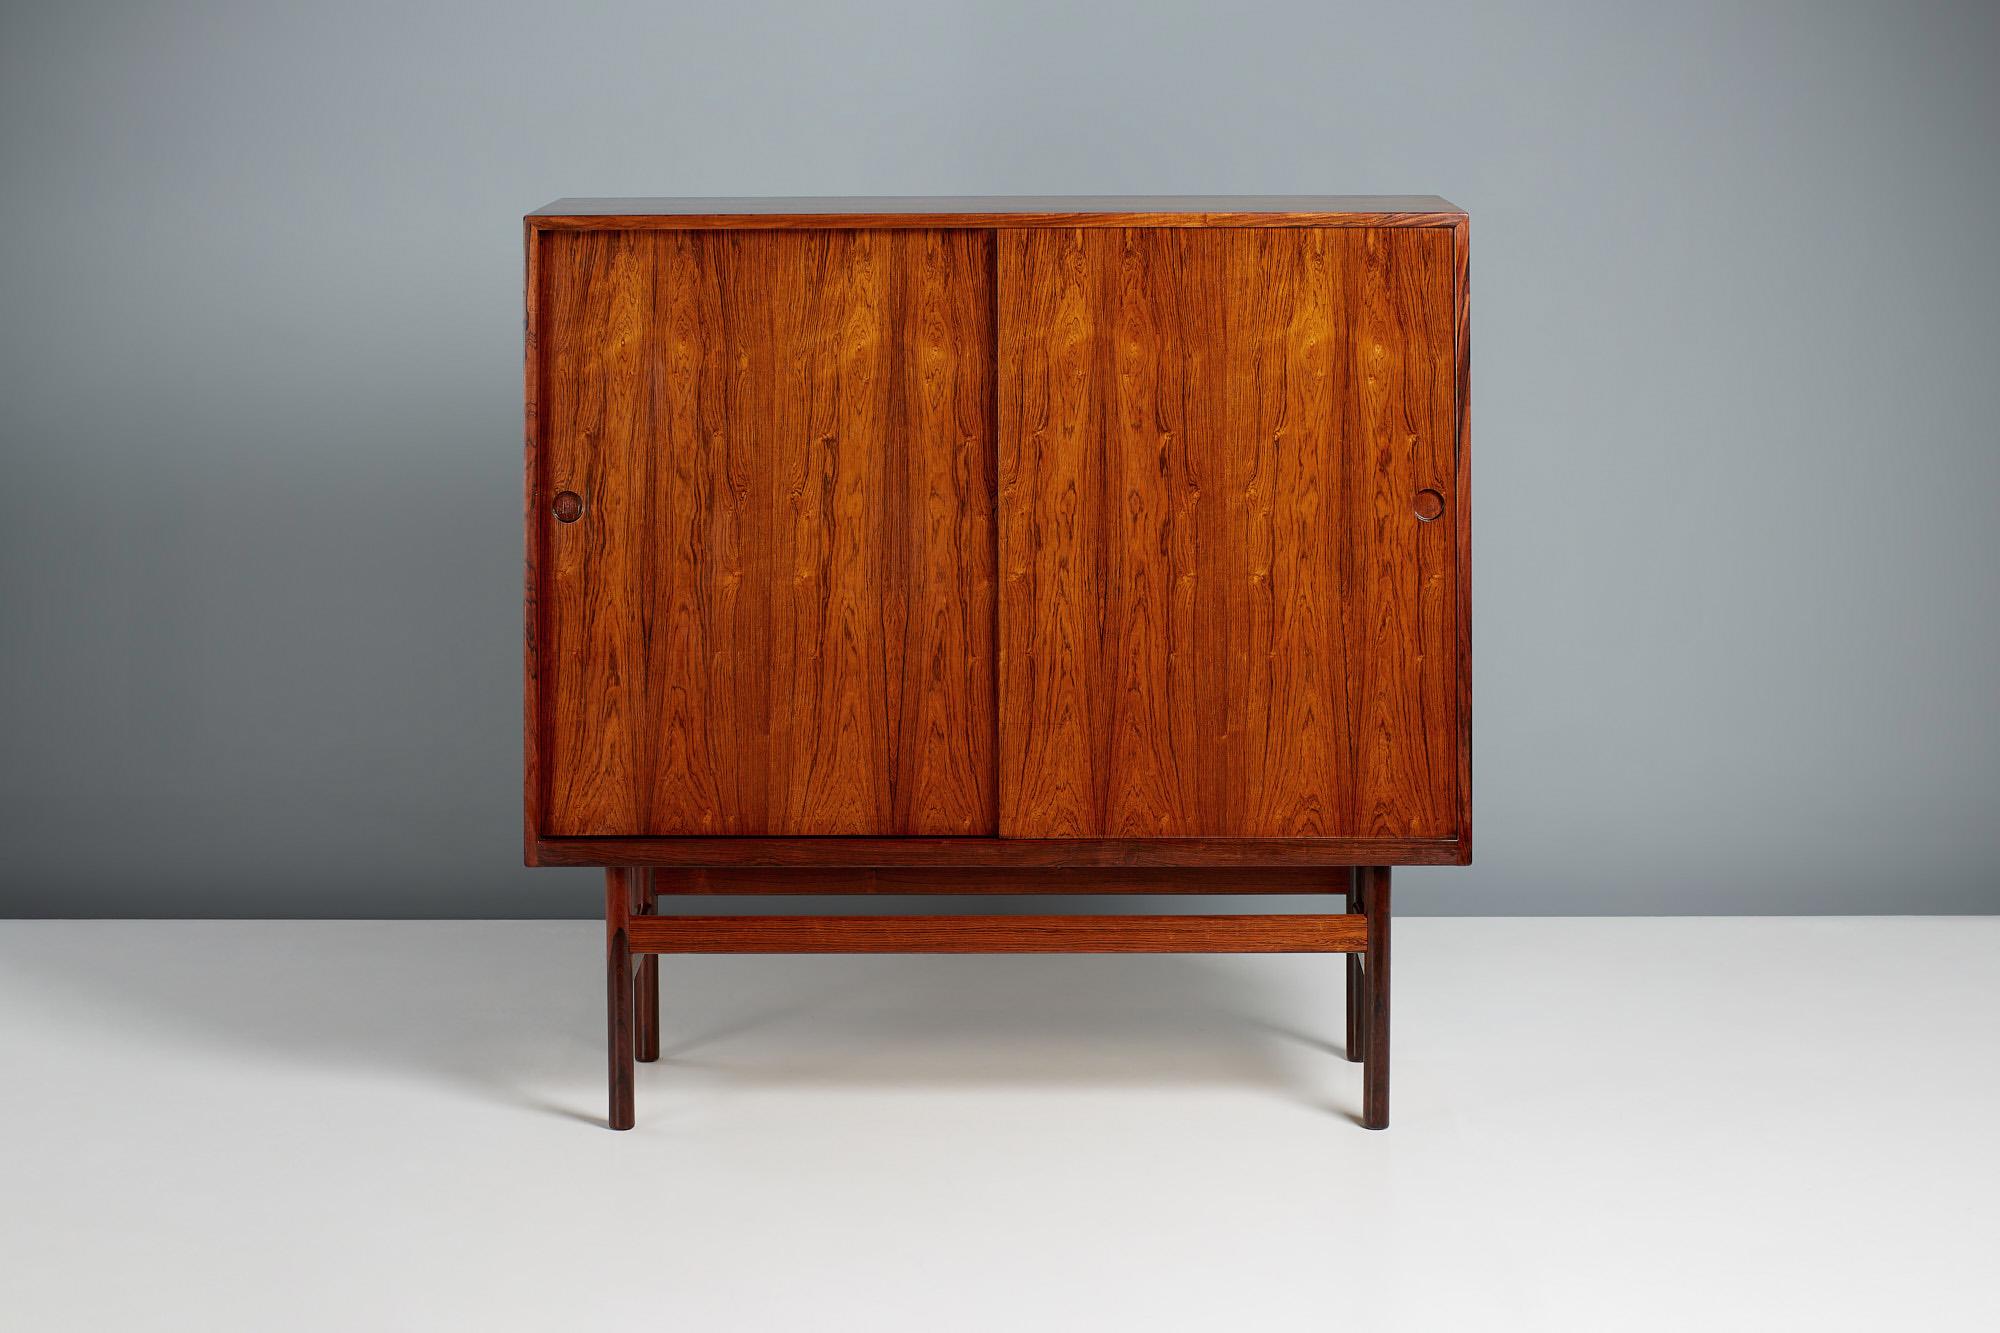 Hans Wegner Tall Cabinet for RY Mobler. 

Exquisite tall cabinet with sliding doors and circular, recessed door pulls probably produced by RY Mobler and designed by Danish mater Hans Wegner. The cabinet is lined with lacquered beech inside and has a